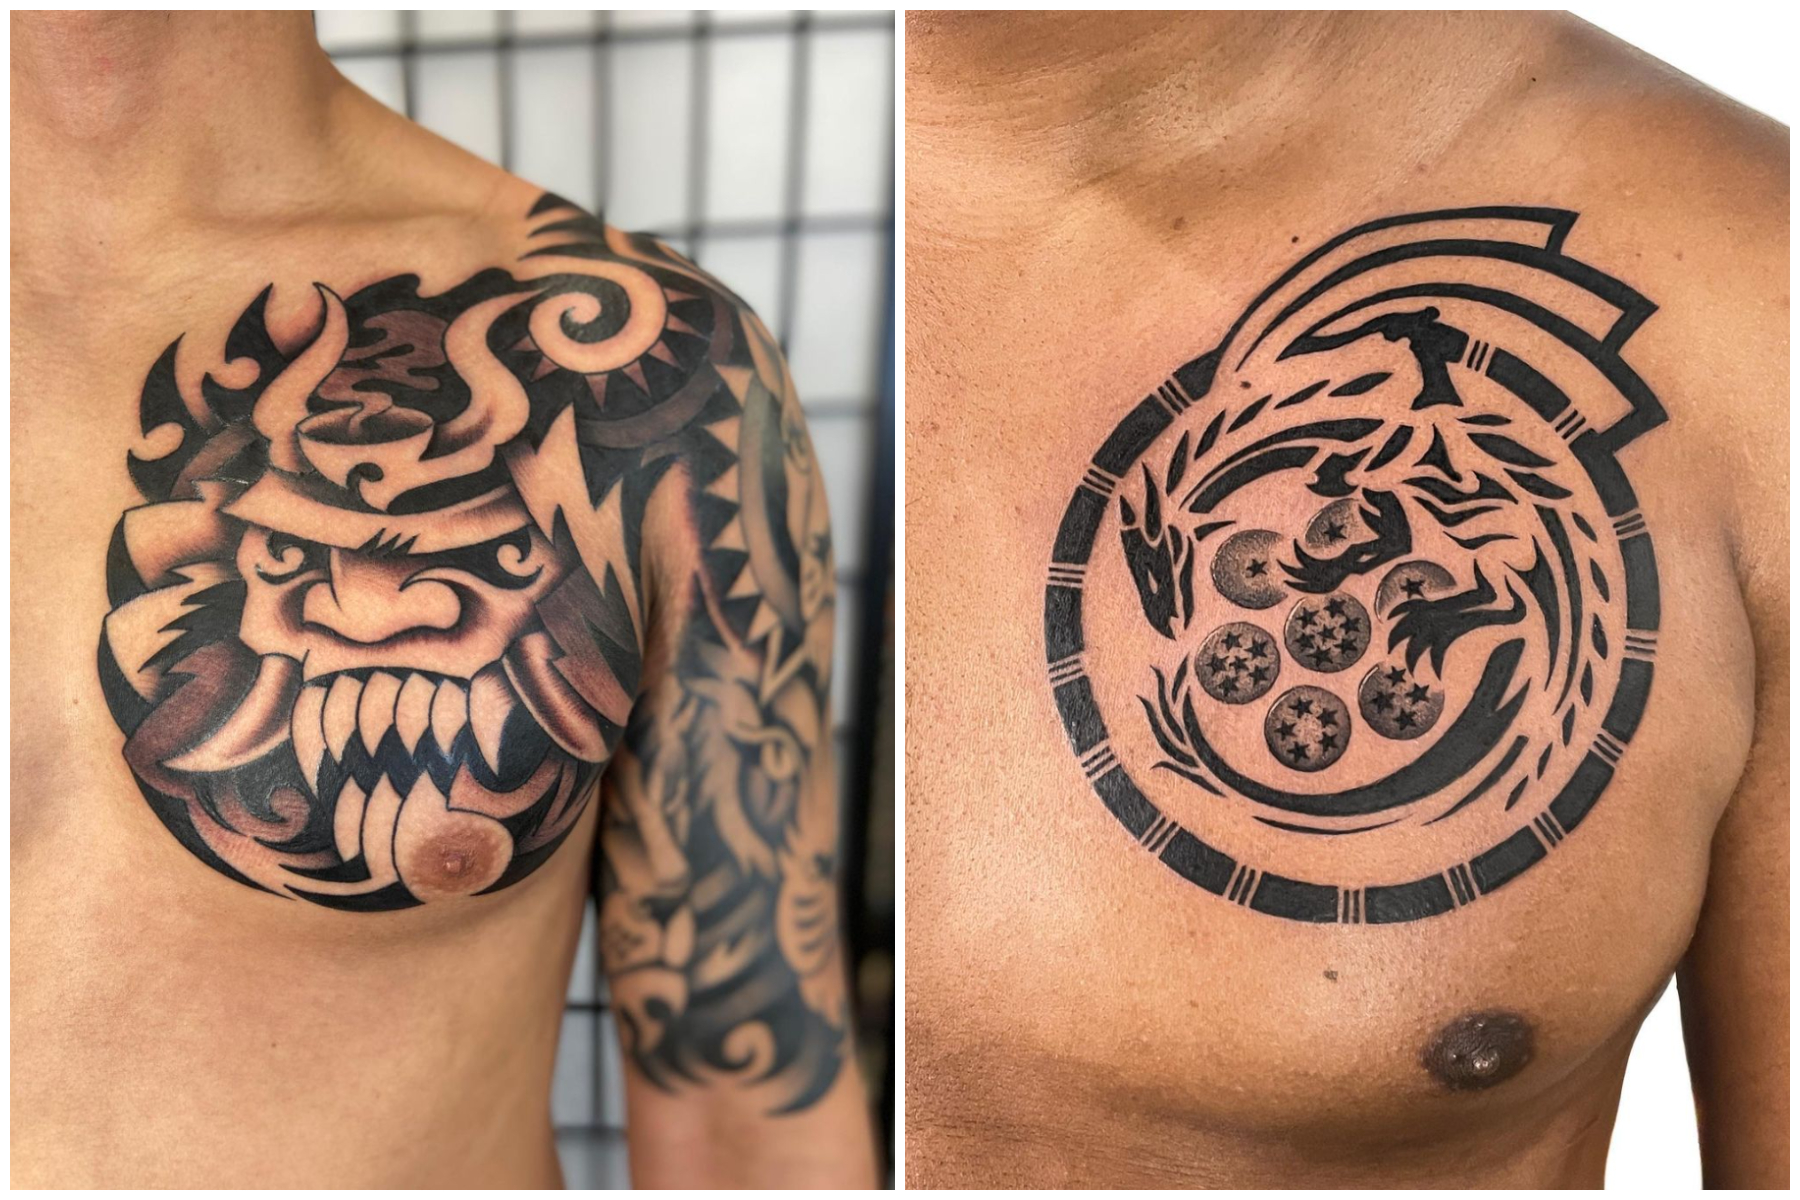 15+ Best Chest Tattoo Designs for Men and Women